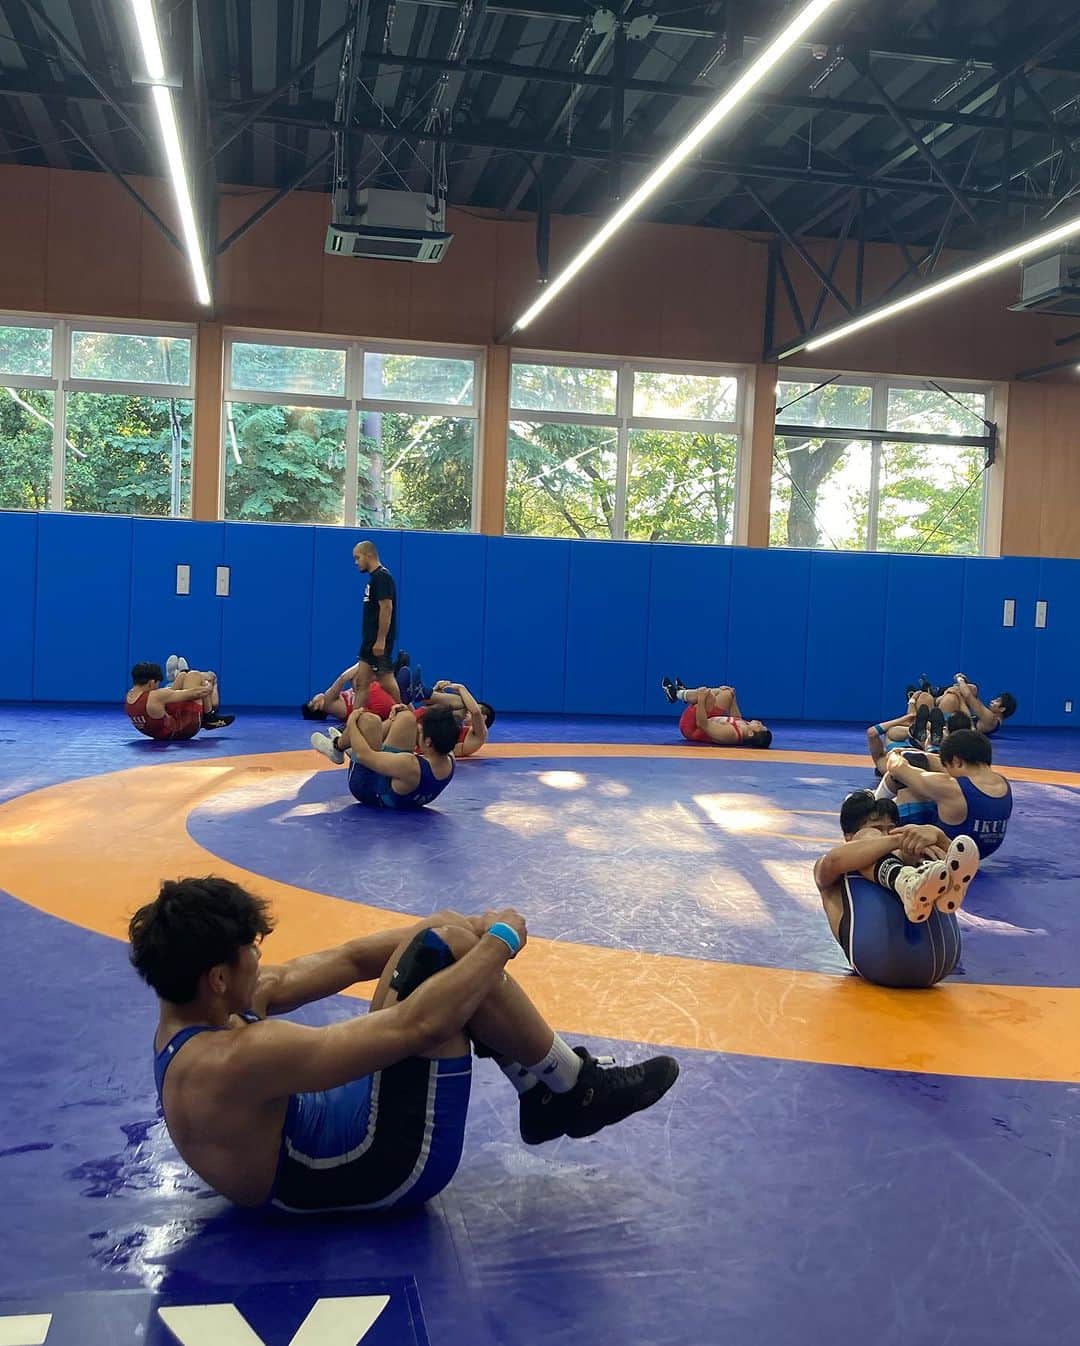 高谷惣亮さんのインスタグラム写真 - (高谷惣亮Instagram)「The other day, I took Takudai wrestlers to Ikuei University for a training session.  Ryutaro Matsumoto is a famous athlete who won a bronze medal in the 60kg Greco weight class at the London Olympics. I competed with him in London, and I still remember how impressed I was.  I asked Ryutaro for his help, and he graciously accepted my request. Thank you very much.  As for practice, many of the players who lead the university Greco team, including Harada, who recently became a member of the World Championships team, practiced very hard. It was a great inspiration for our Takushoku members.  I am originally a freestyle player, but I would like to learn both freestyle and greco in order to strengthen both. I would like to thank Ryutaro, Yanagawa Sensei, and Coach Ueno for their detailed guidance this time. I look forward to working with you again.  先日、拓大の選手を連れて育英大学の方へ出稽古へ行ってきました。  隆太郎先生はロンドン五輪でグレコ60kg級で銅メダルを獲得した名選手です。私も一緒にロンドンで戦ってきましたがその感動は今でも覚えています。  その隆太郎先生にお願いしたところ、快く受け入れていただきました。ありがとうございます。  練習に関しても、先日世界選手権代表となった原田選手を含め大学のグレコを引っ張る選手が多いのでとてもハードな練習をこなしていました。 うちの選手達にもとても良い刺激になりました。  私自身は元々フリーの選手ですが、指導に関して、フリーもグレコも学んで両方強くしていきたいと思っています。今回細かい指導もしてくださった隆太郎先生はじめ柳川先生、上野コーチ、ありがとうございました。 またよろしくお願いします。」7月27日 9時57分 - sohsuketakatani